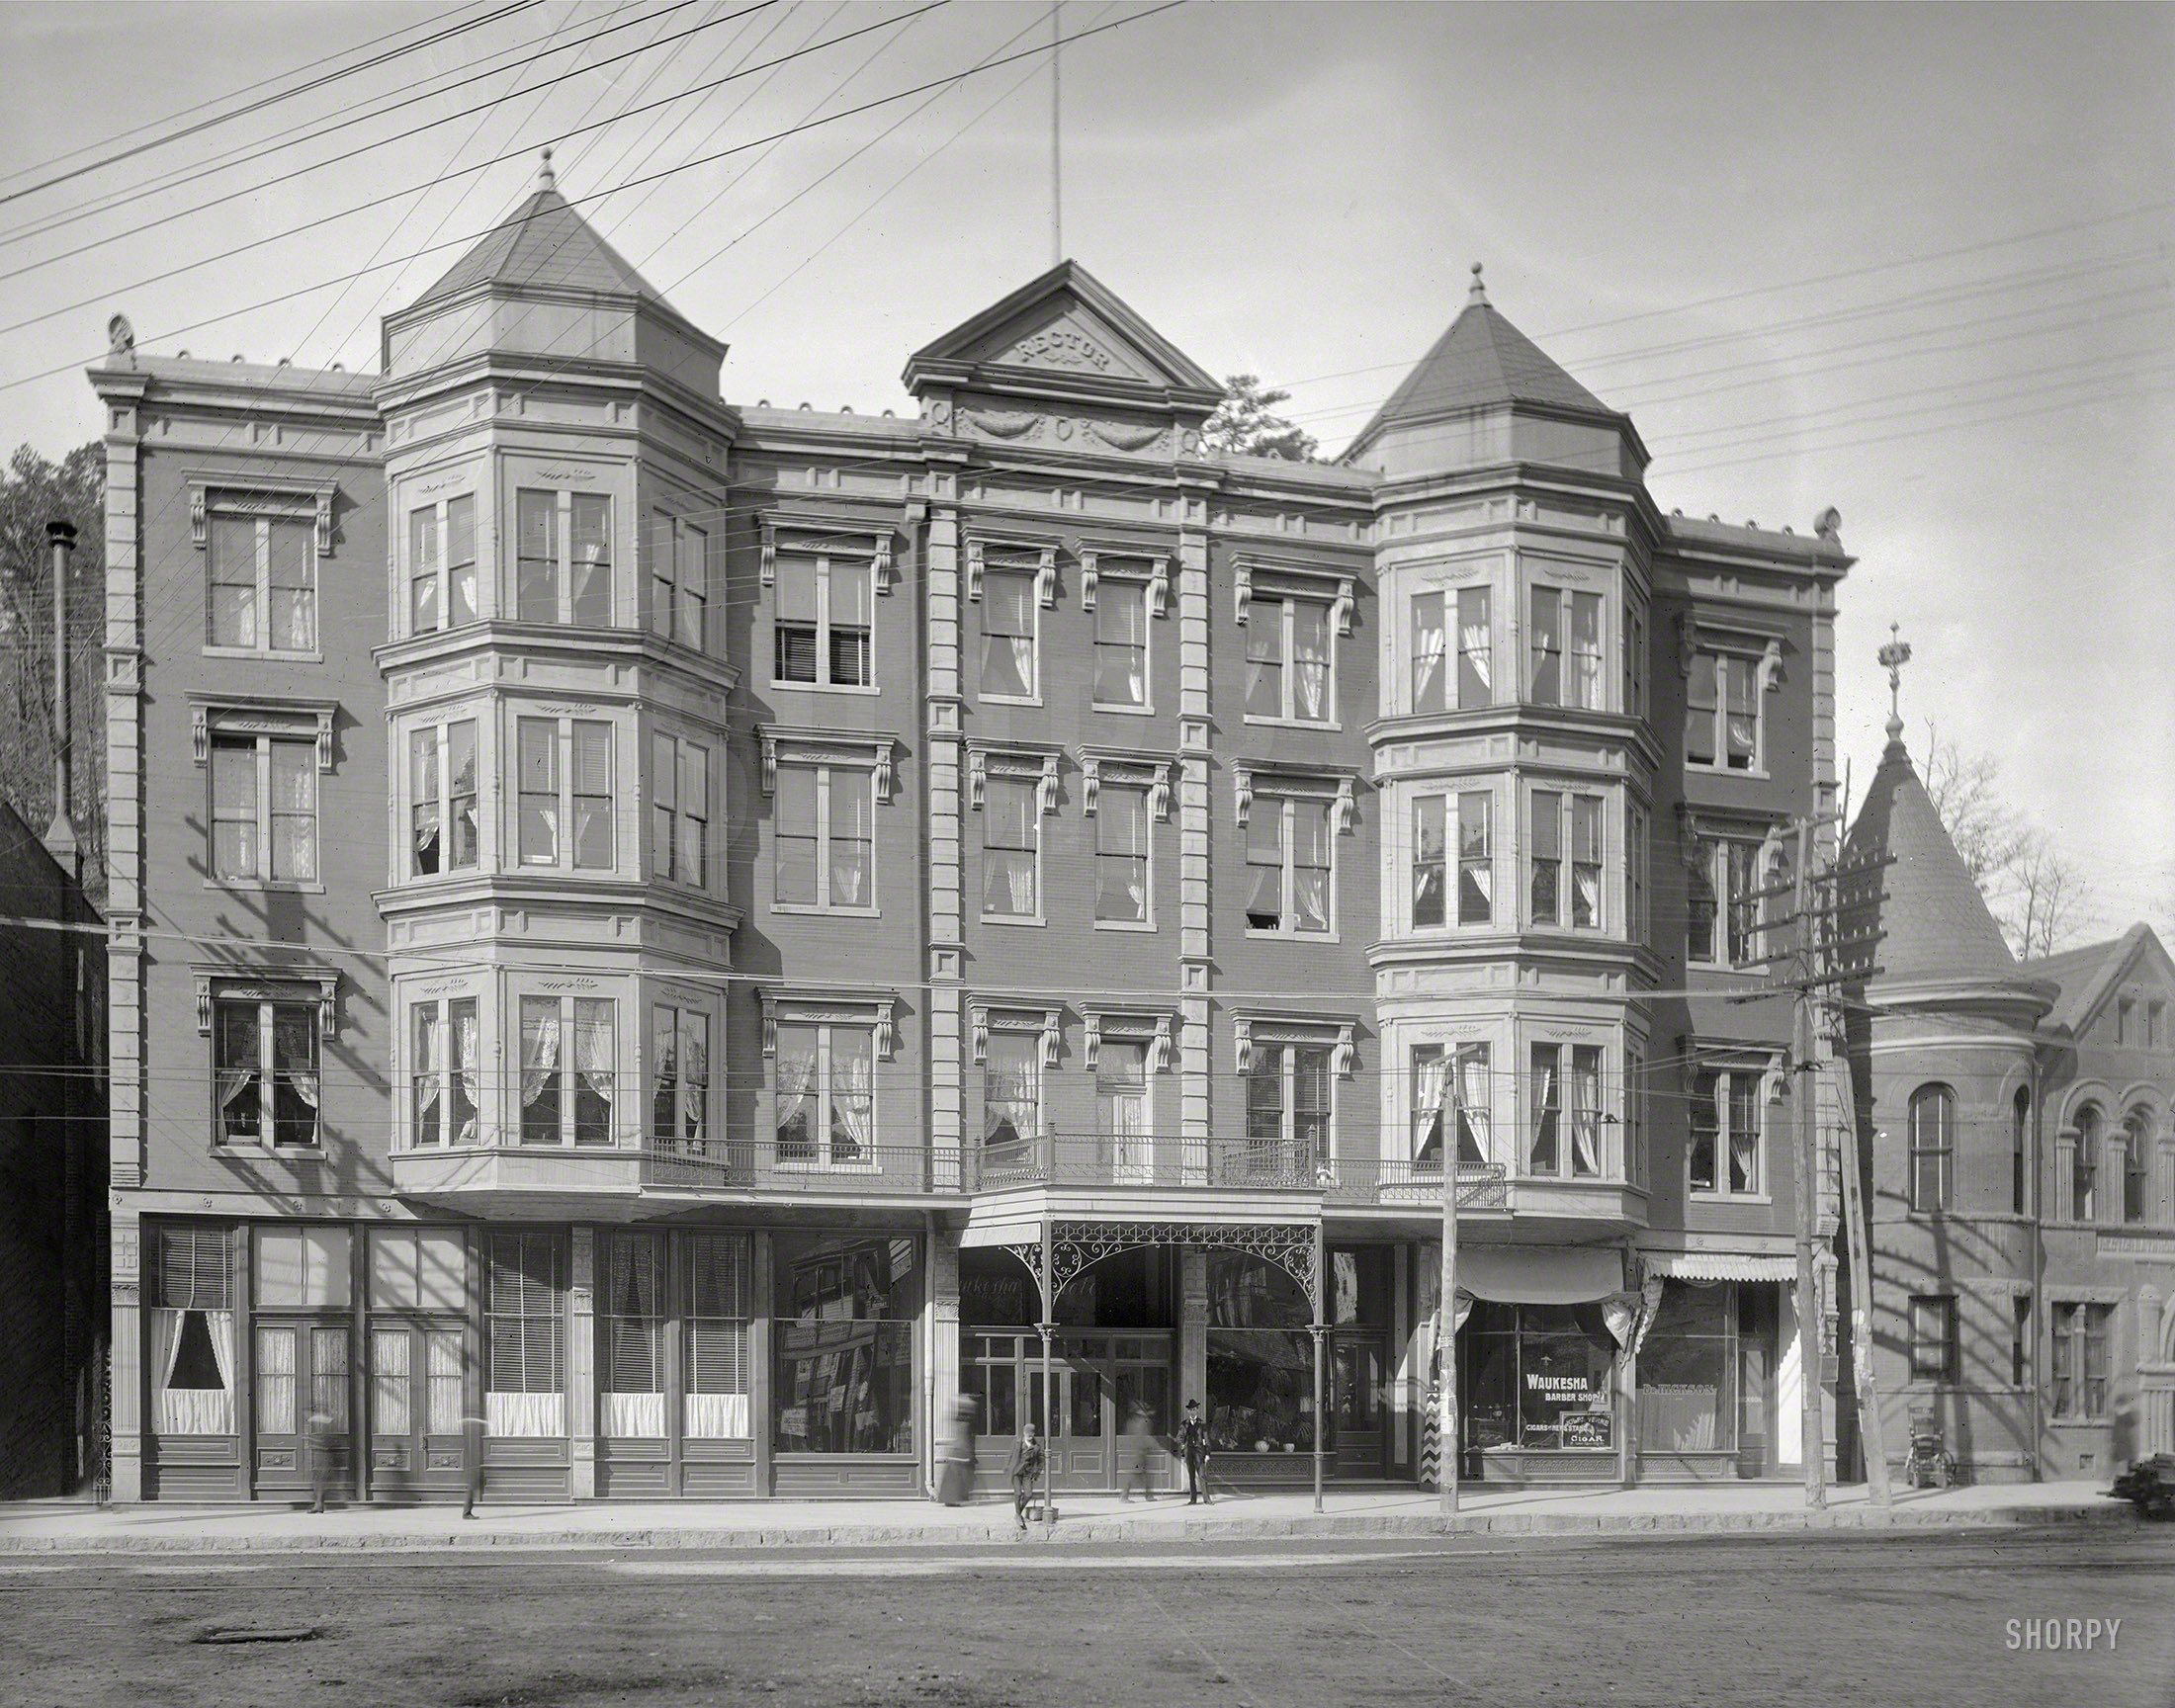 Circa 1905. "Waukesha Hotel and Rector Bath House -- Hot Springs, Arkansas." 8x10 inch dry plate glass negative, Detroit Publishing Company. View full size.